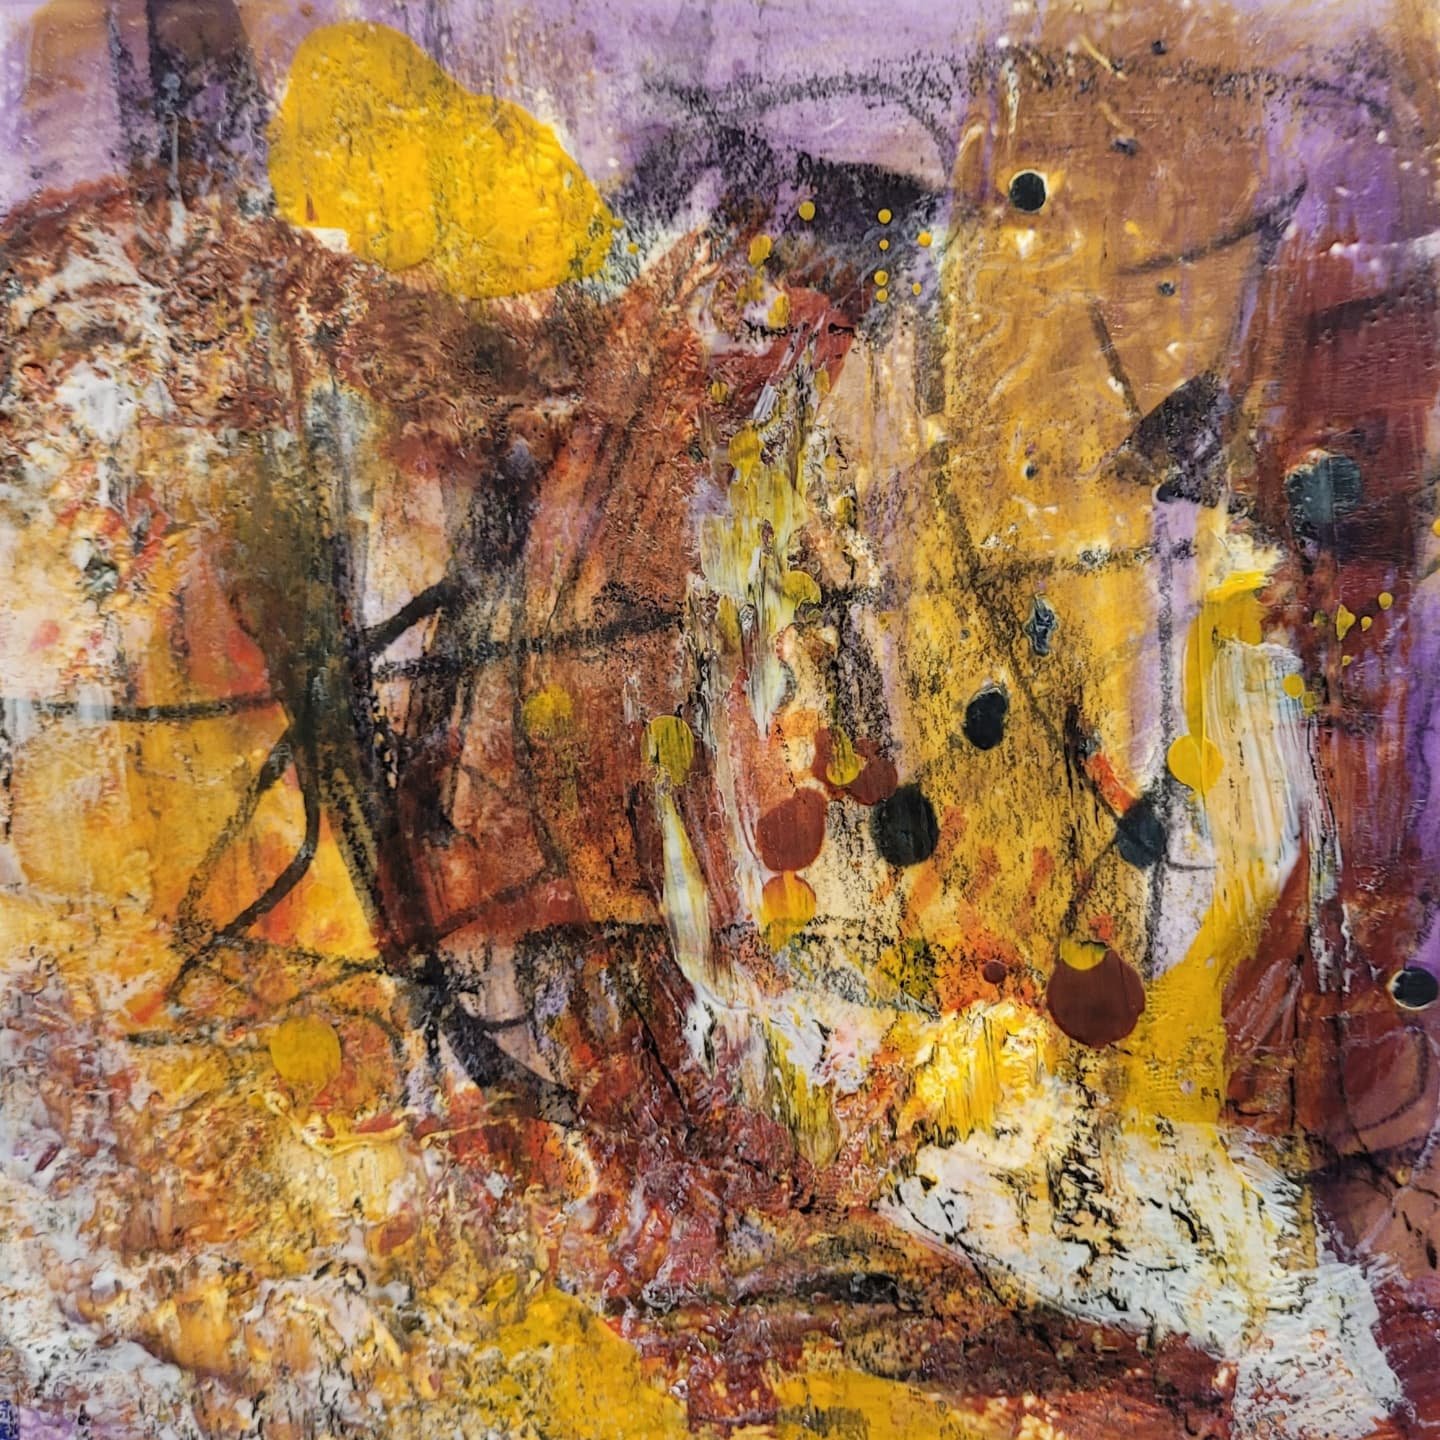   Late Autumn , encaustic on paper, 6 x 6 in. 